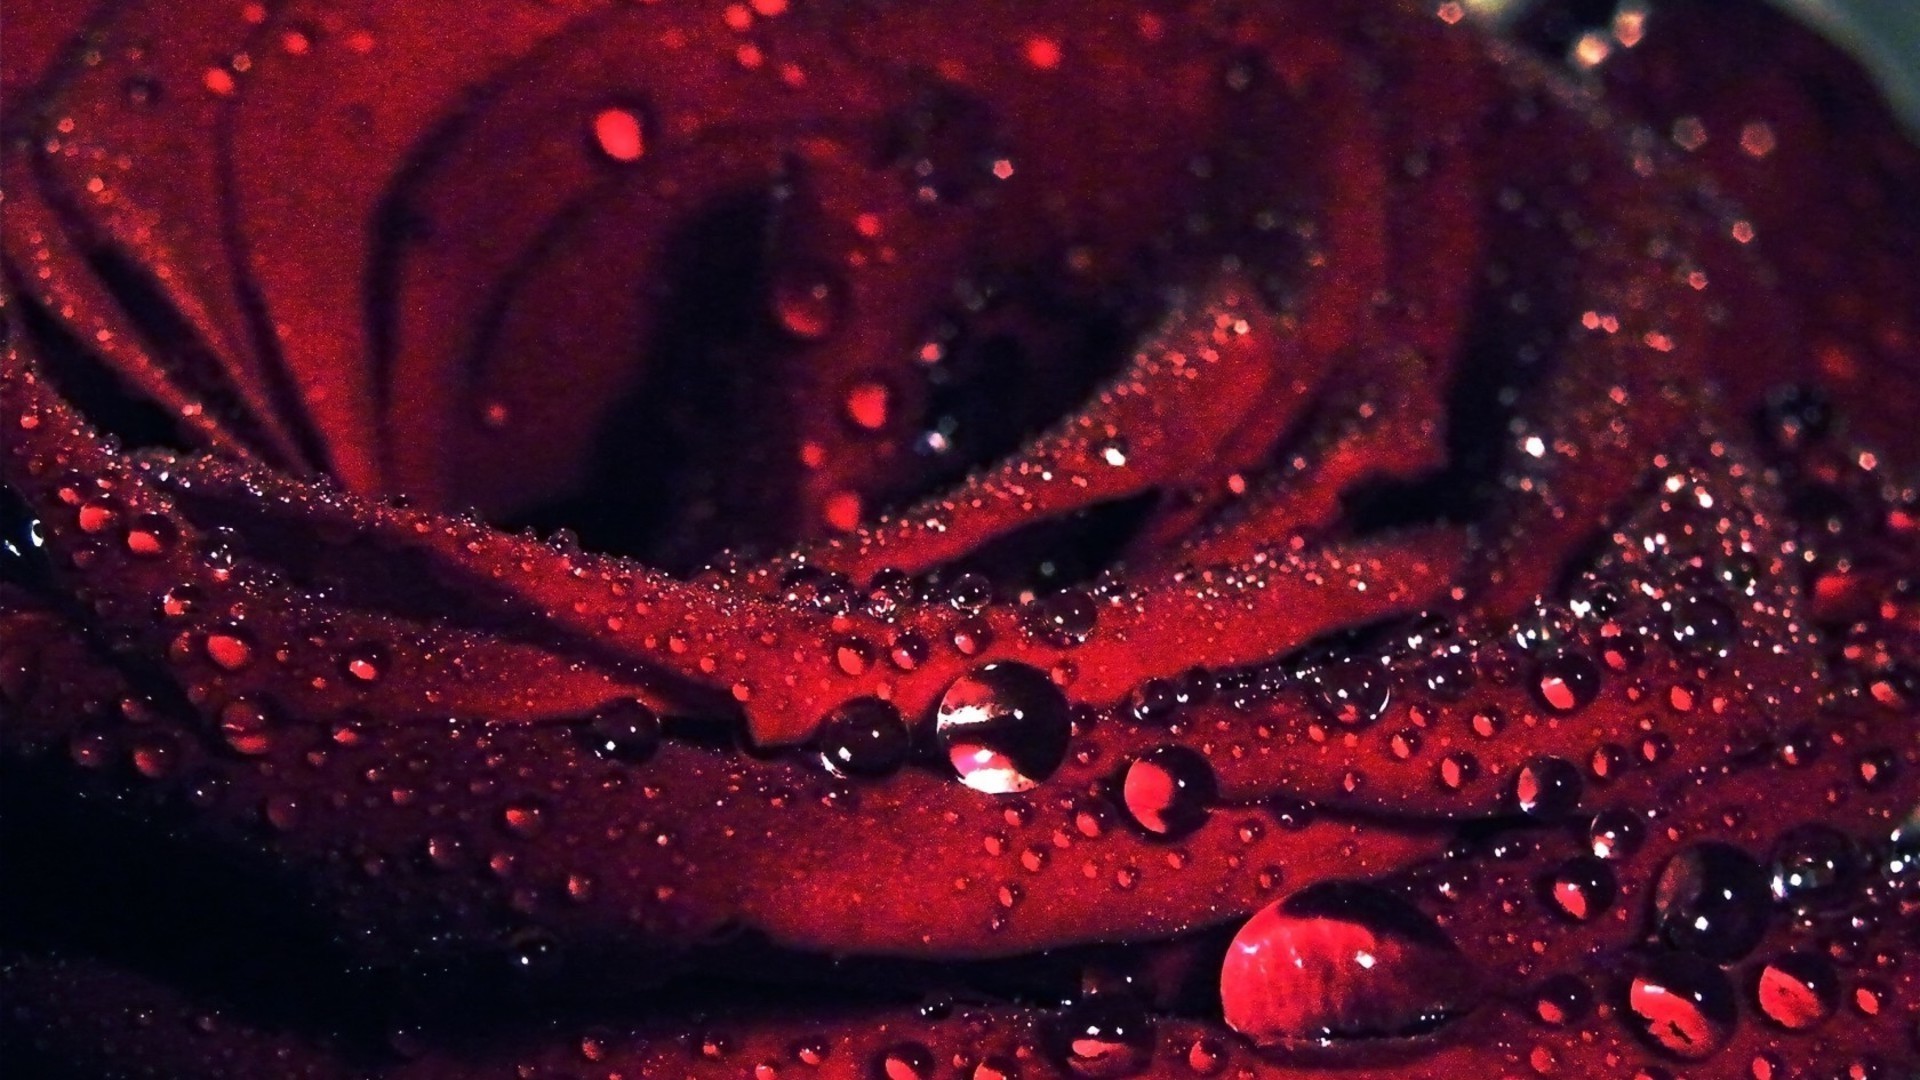 Water drops on red rose wallpaper 3978